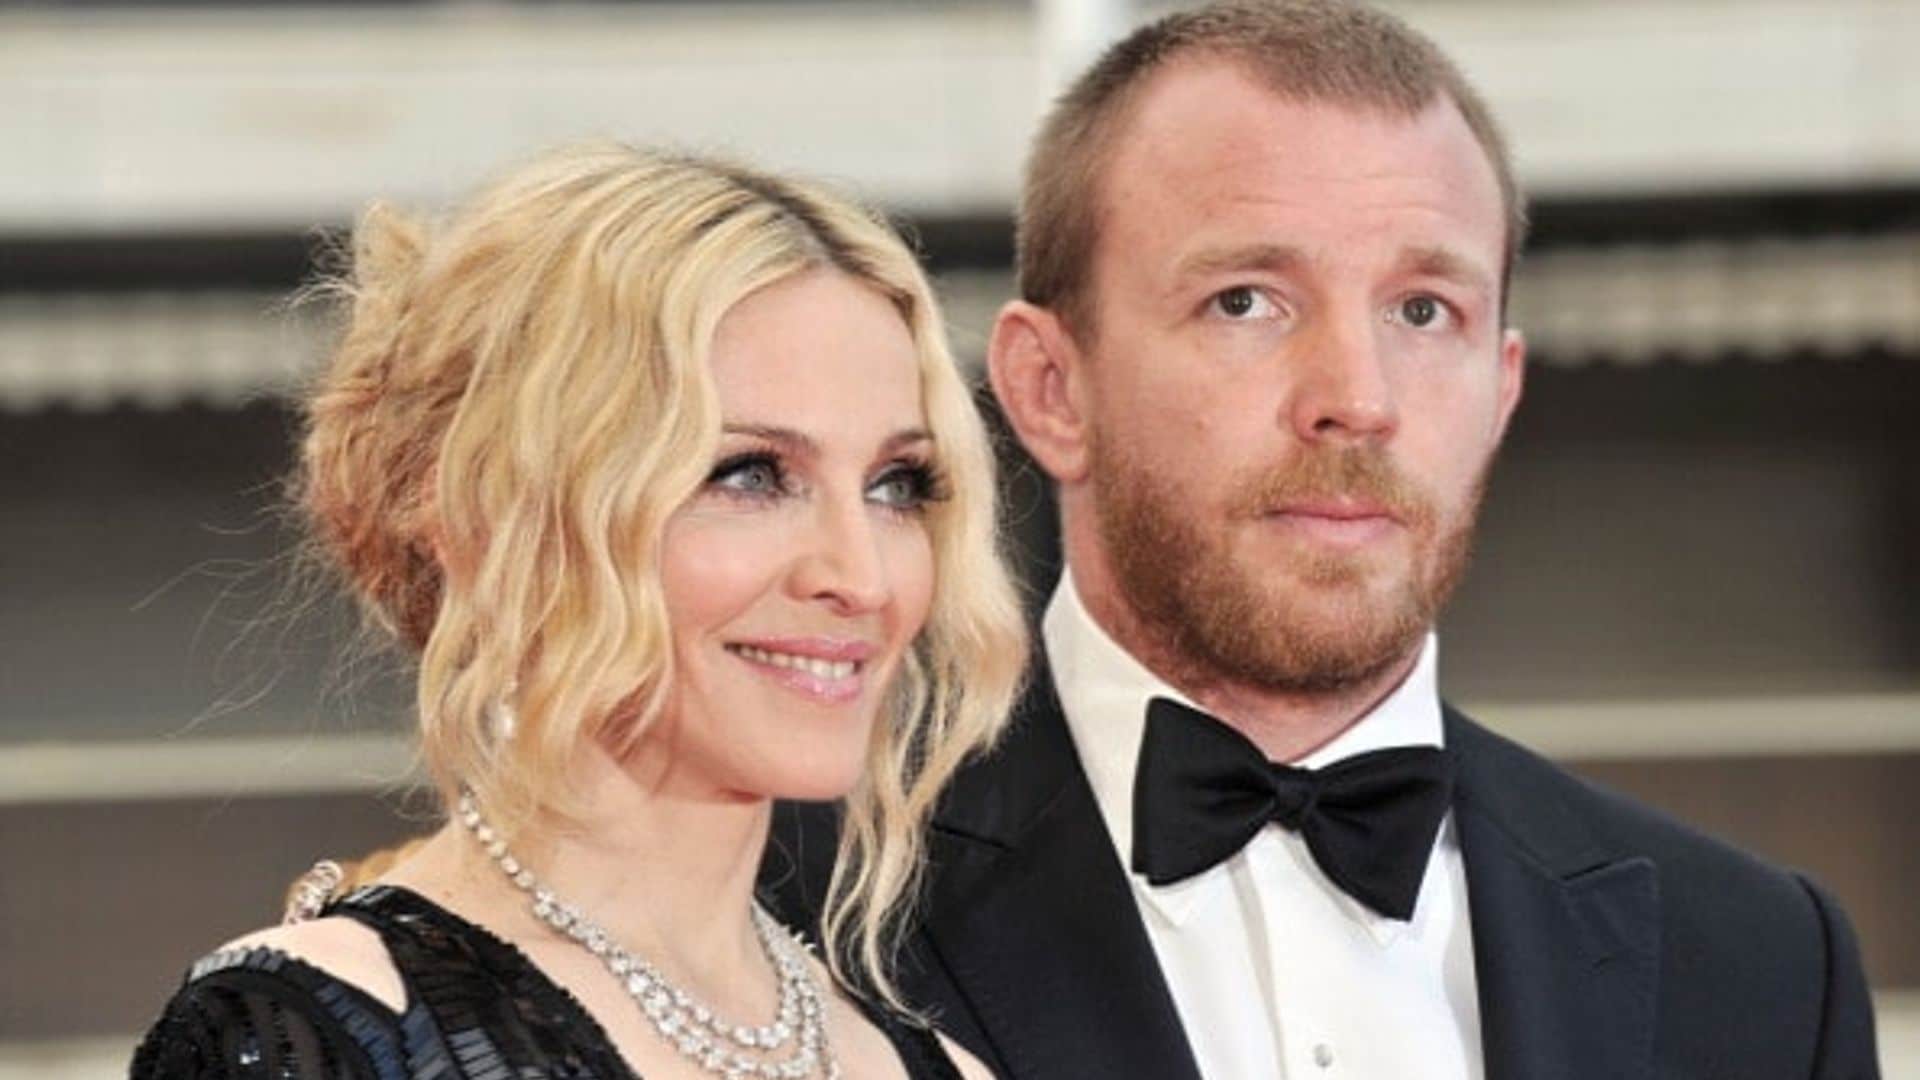 Madonna and Guy Ritchie reunite to sing 'Happy Birthday' to son Rocco